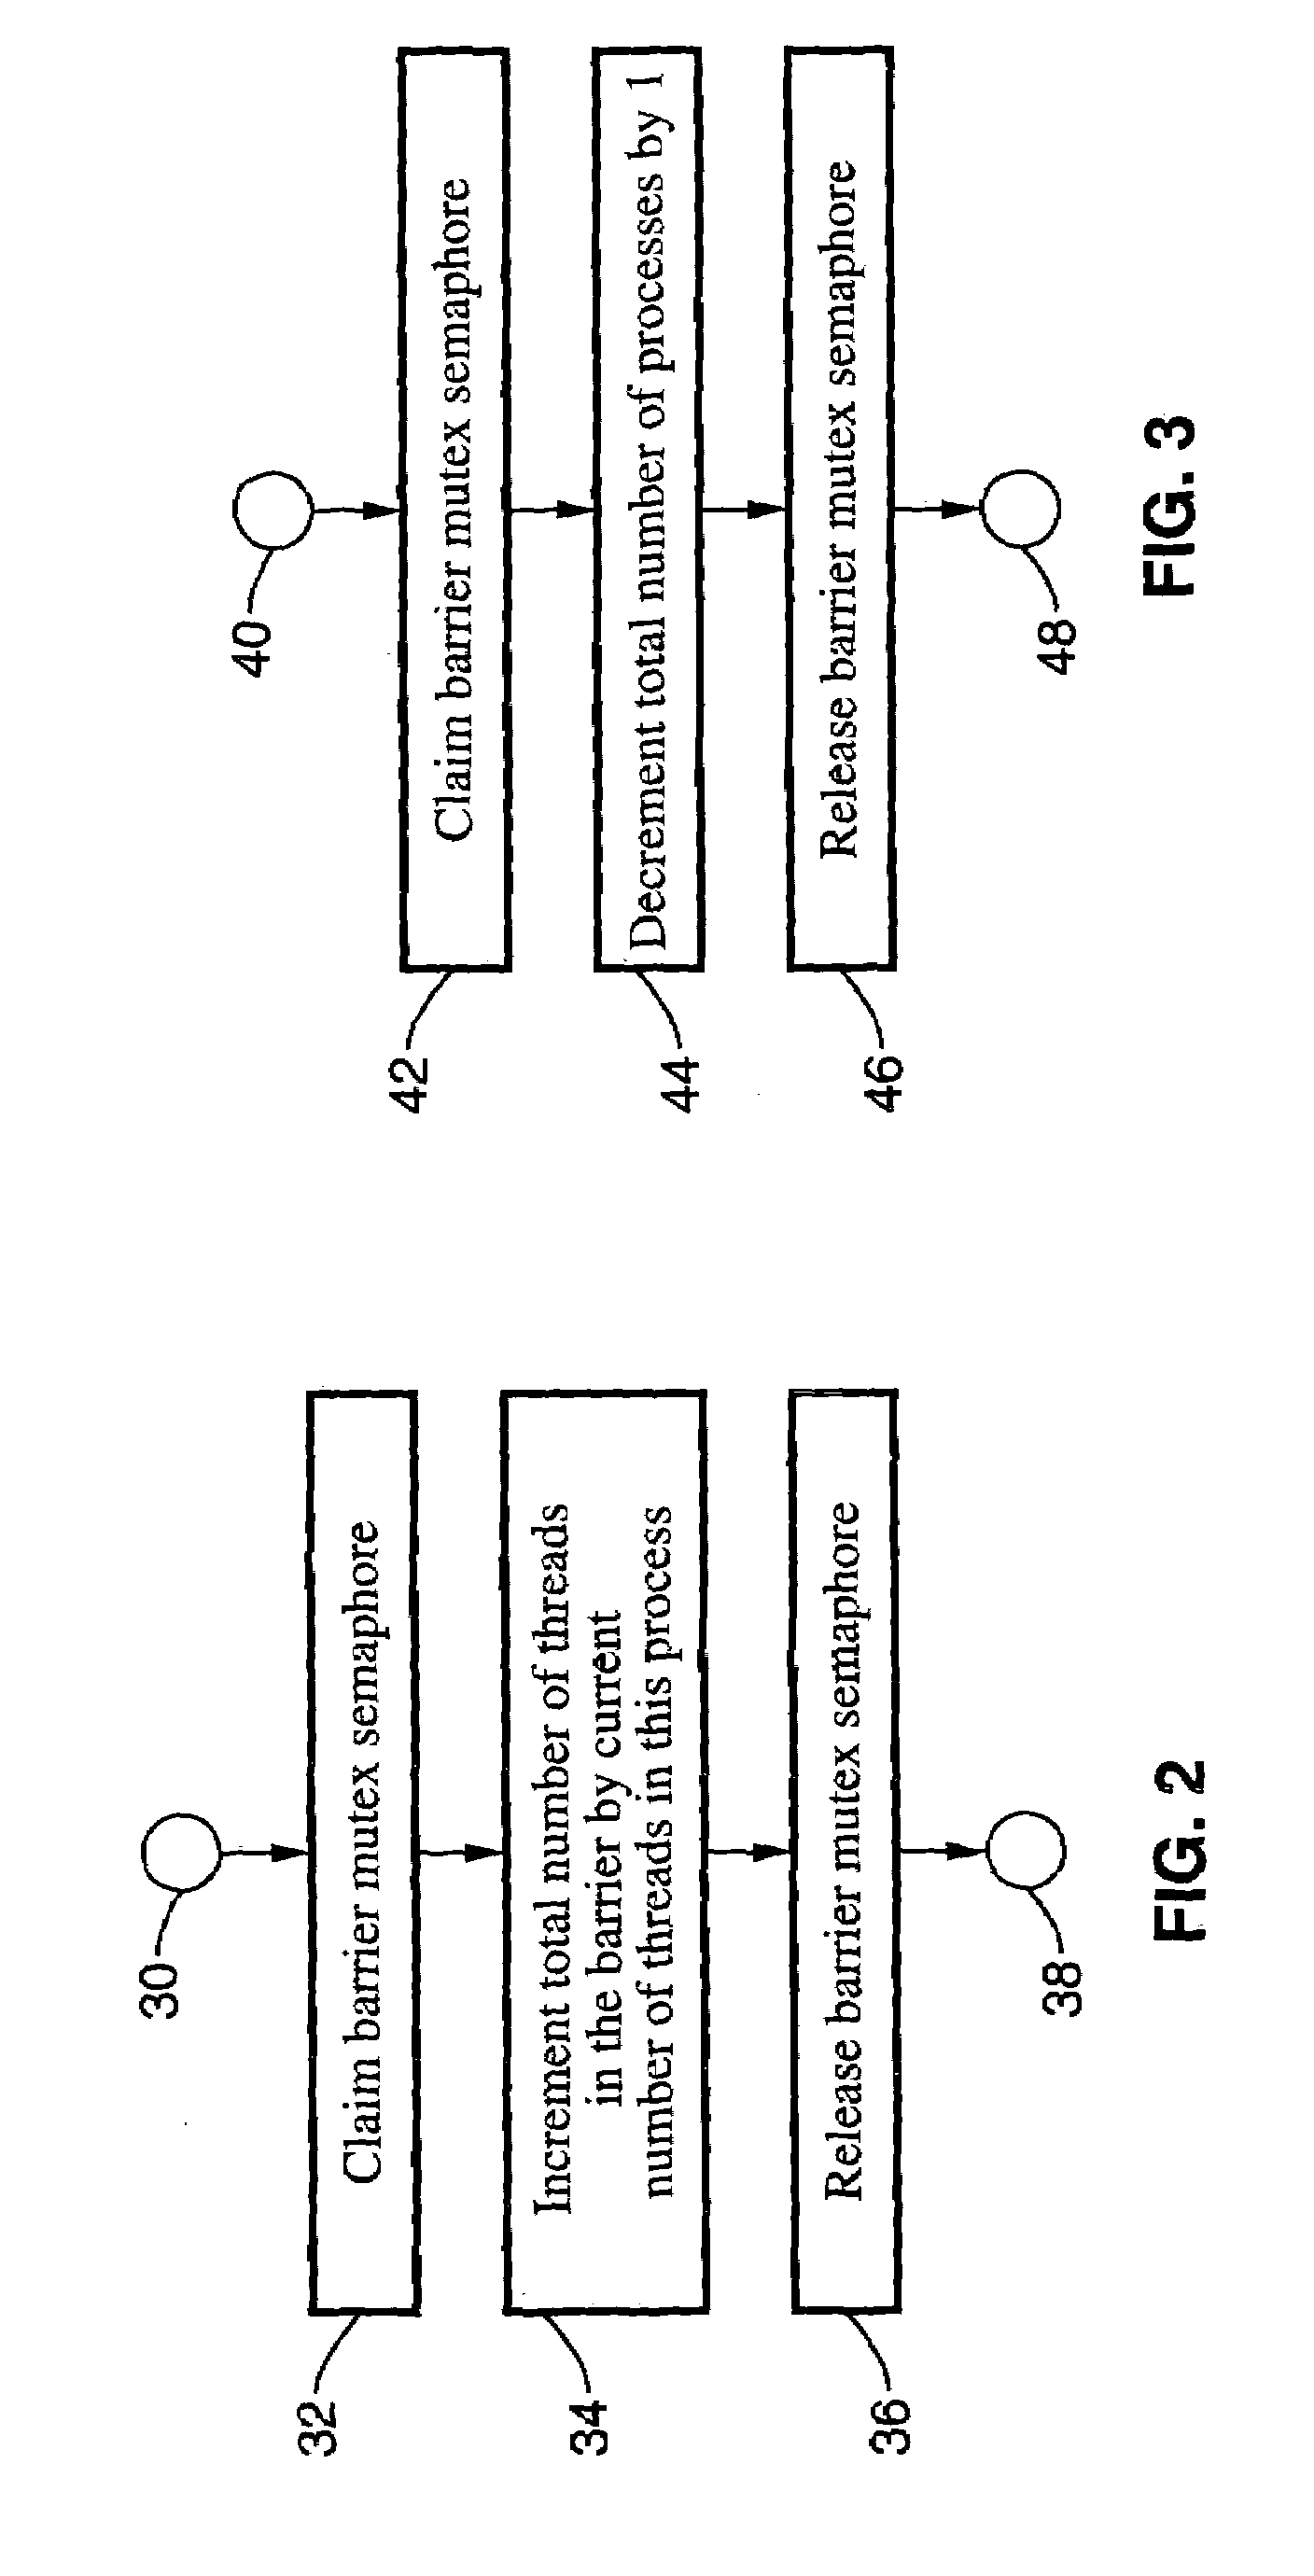 Method and system for providing transparent incremental and multiprocess checkpointing to computer applications